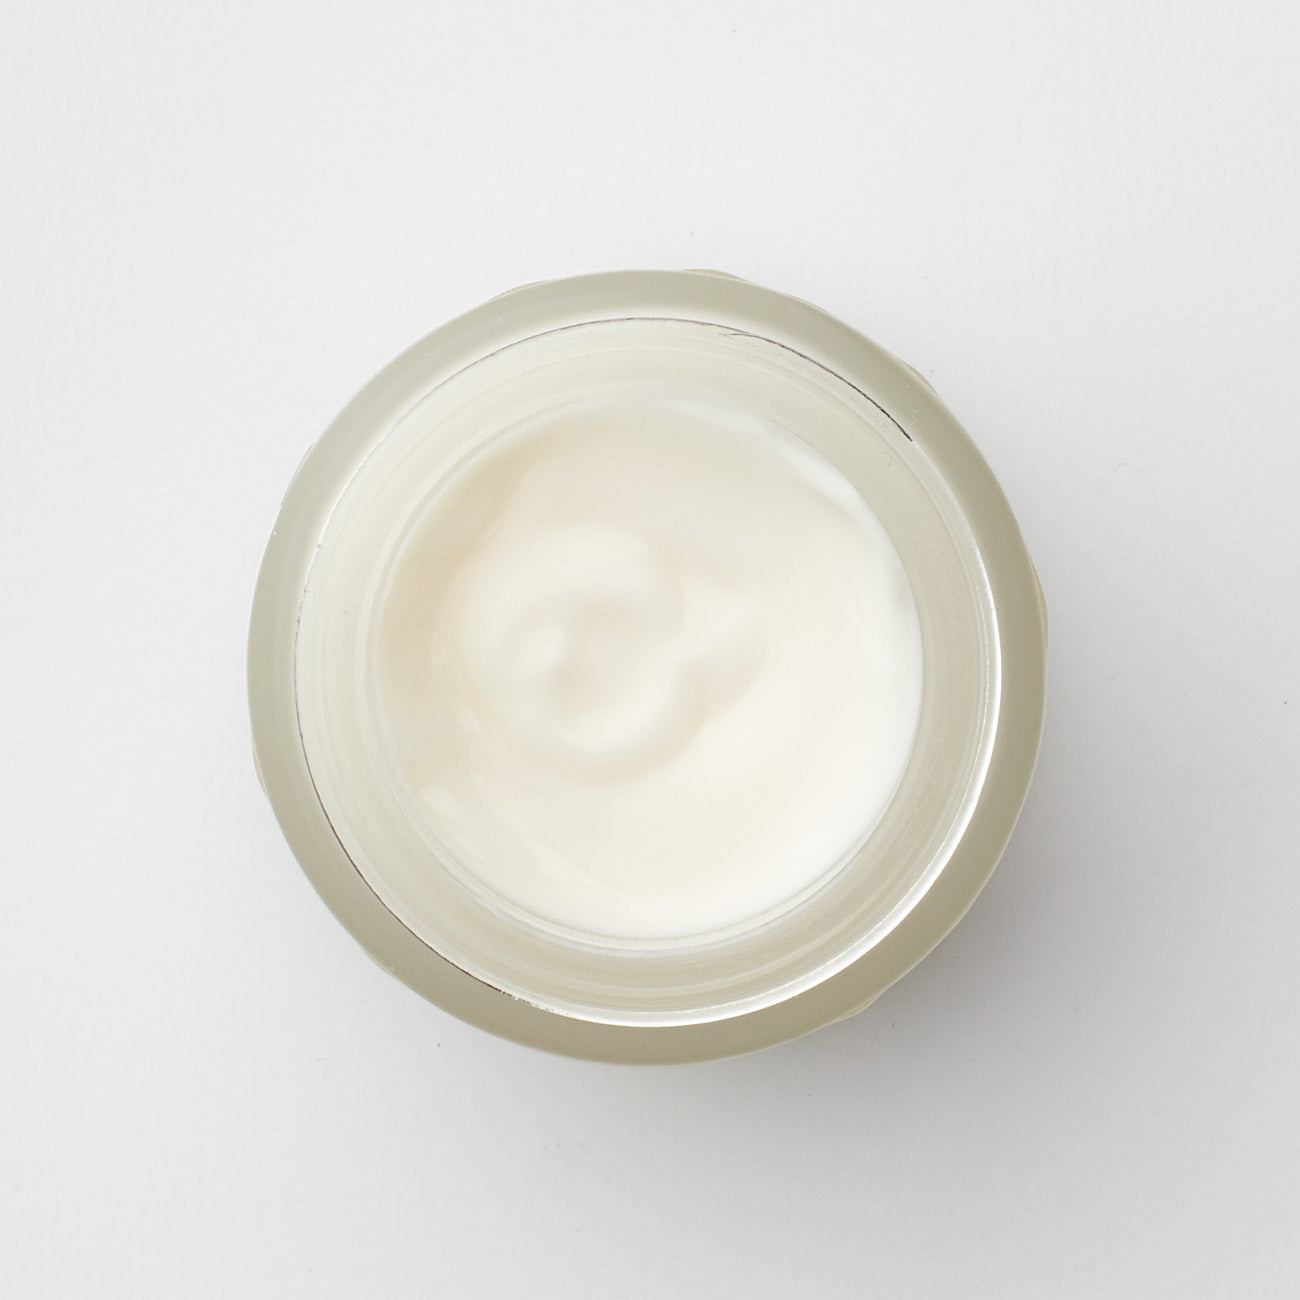 photo showcasing the texture of Marshmallow Root Day Moisture Cream by Carol Priest, a natural, organic cosmetic